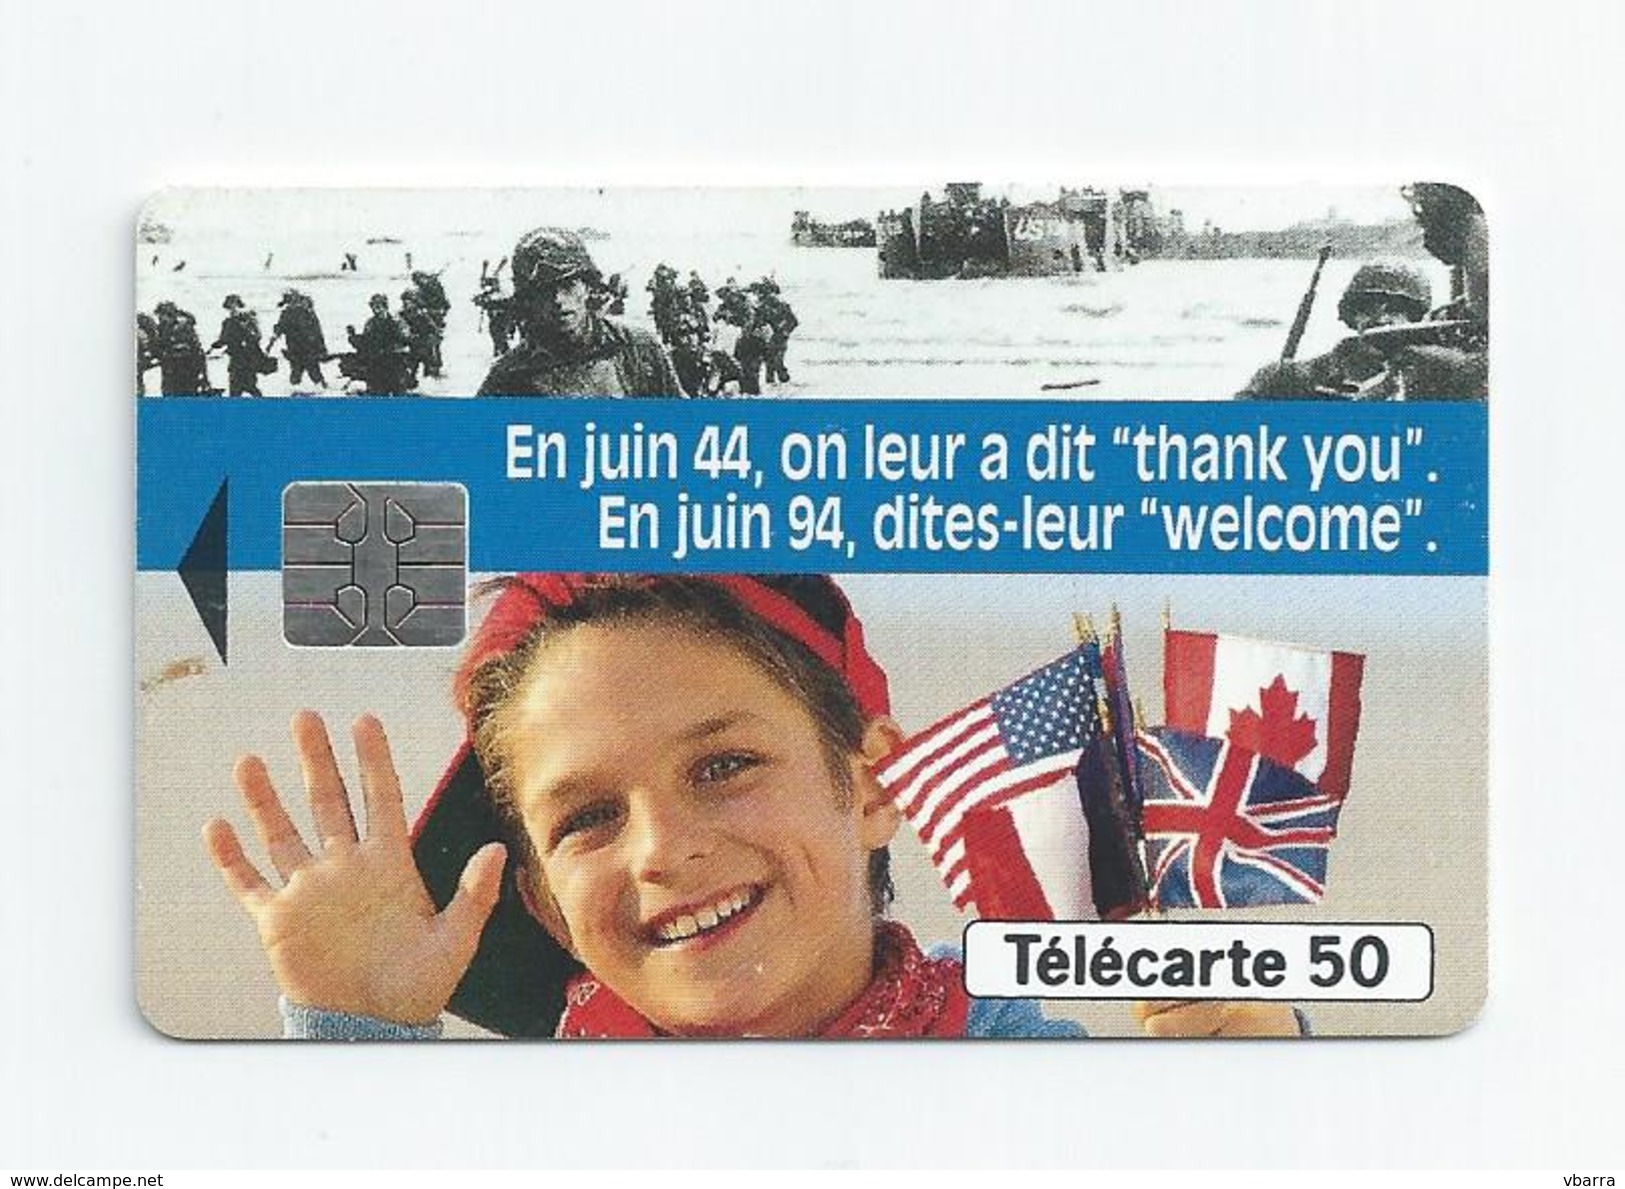 PHONE CARD Of France Telecom 50th Anniversary Of Normandy's Allied Landing In Normandy In World War II Guerre Telecarte - Cultura